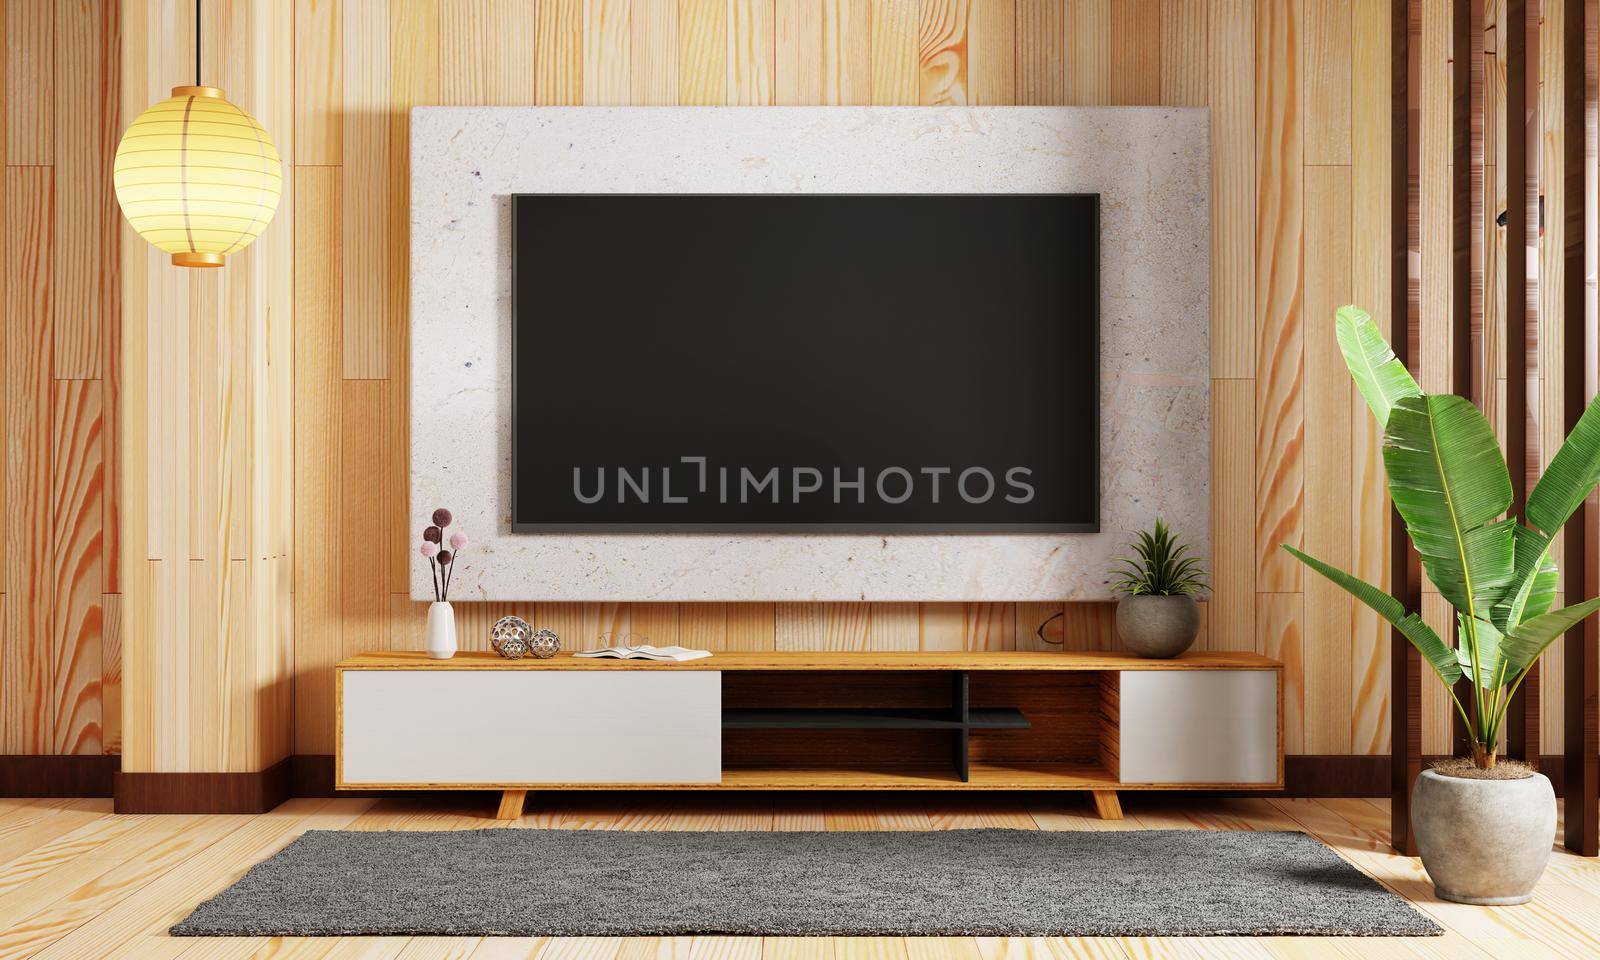 Japanese style modern living room with hanging mockup television tv on wall background. Interior and architecture concept. 3D illustration rendering